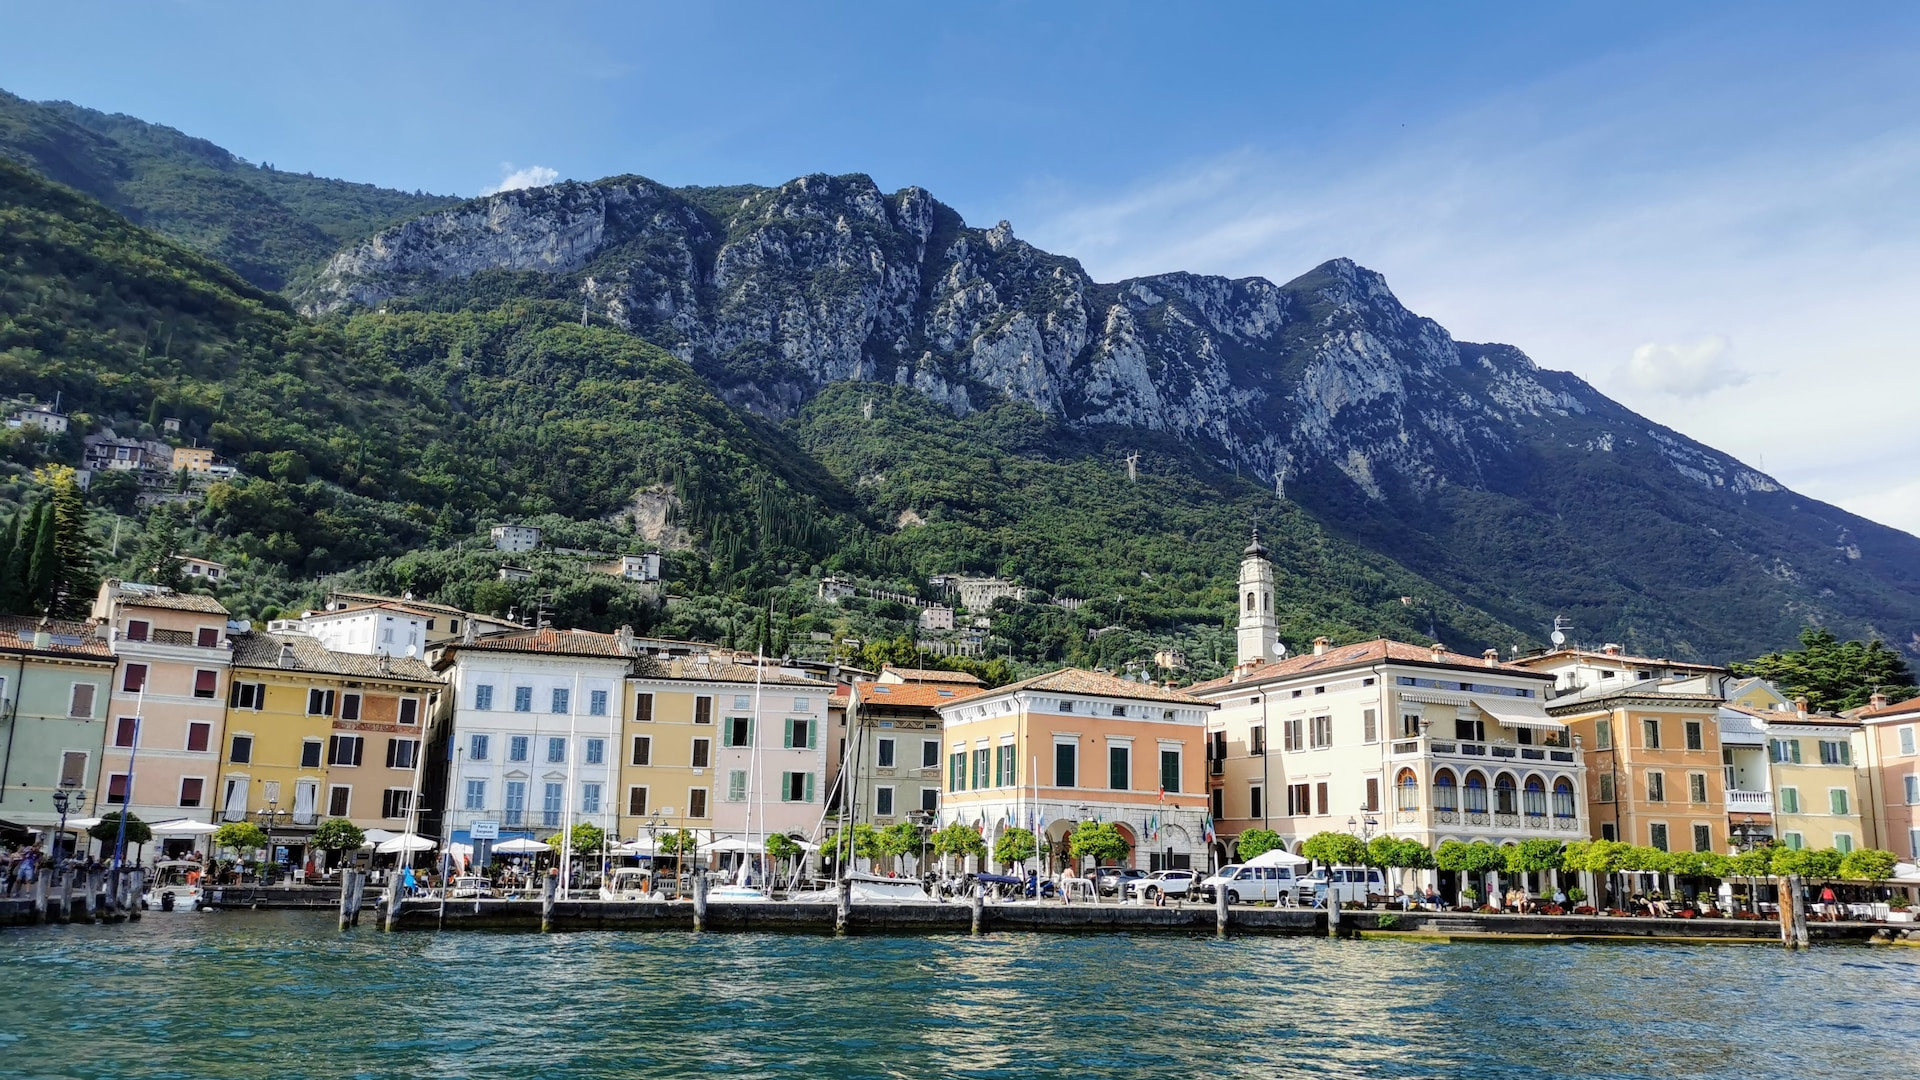 Scenic view of a picturesque lakeside town on Lake Garda, northern Italy, symbolizing GaussML's expansion into the Italian market.